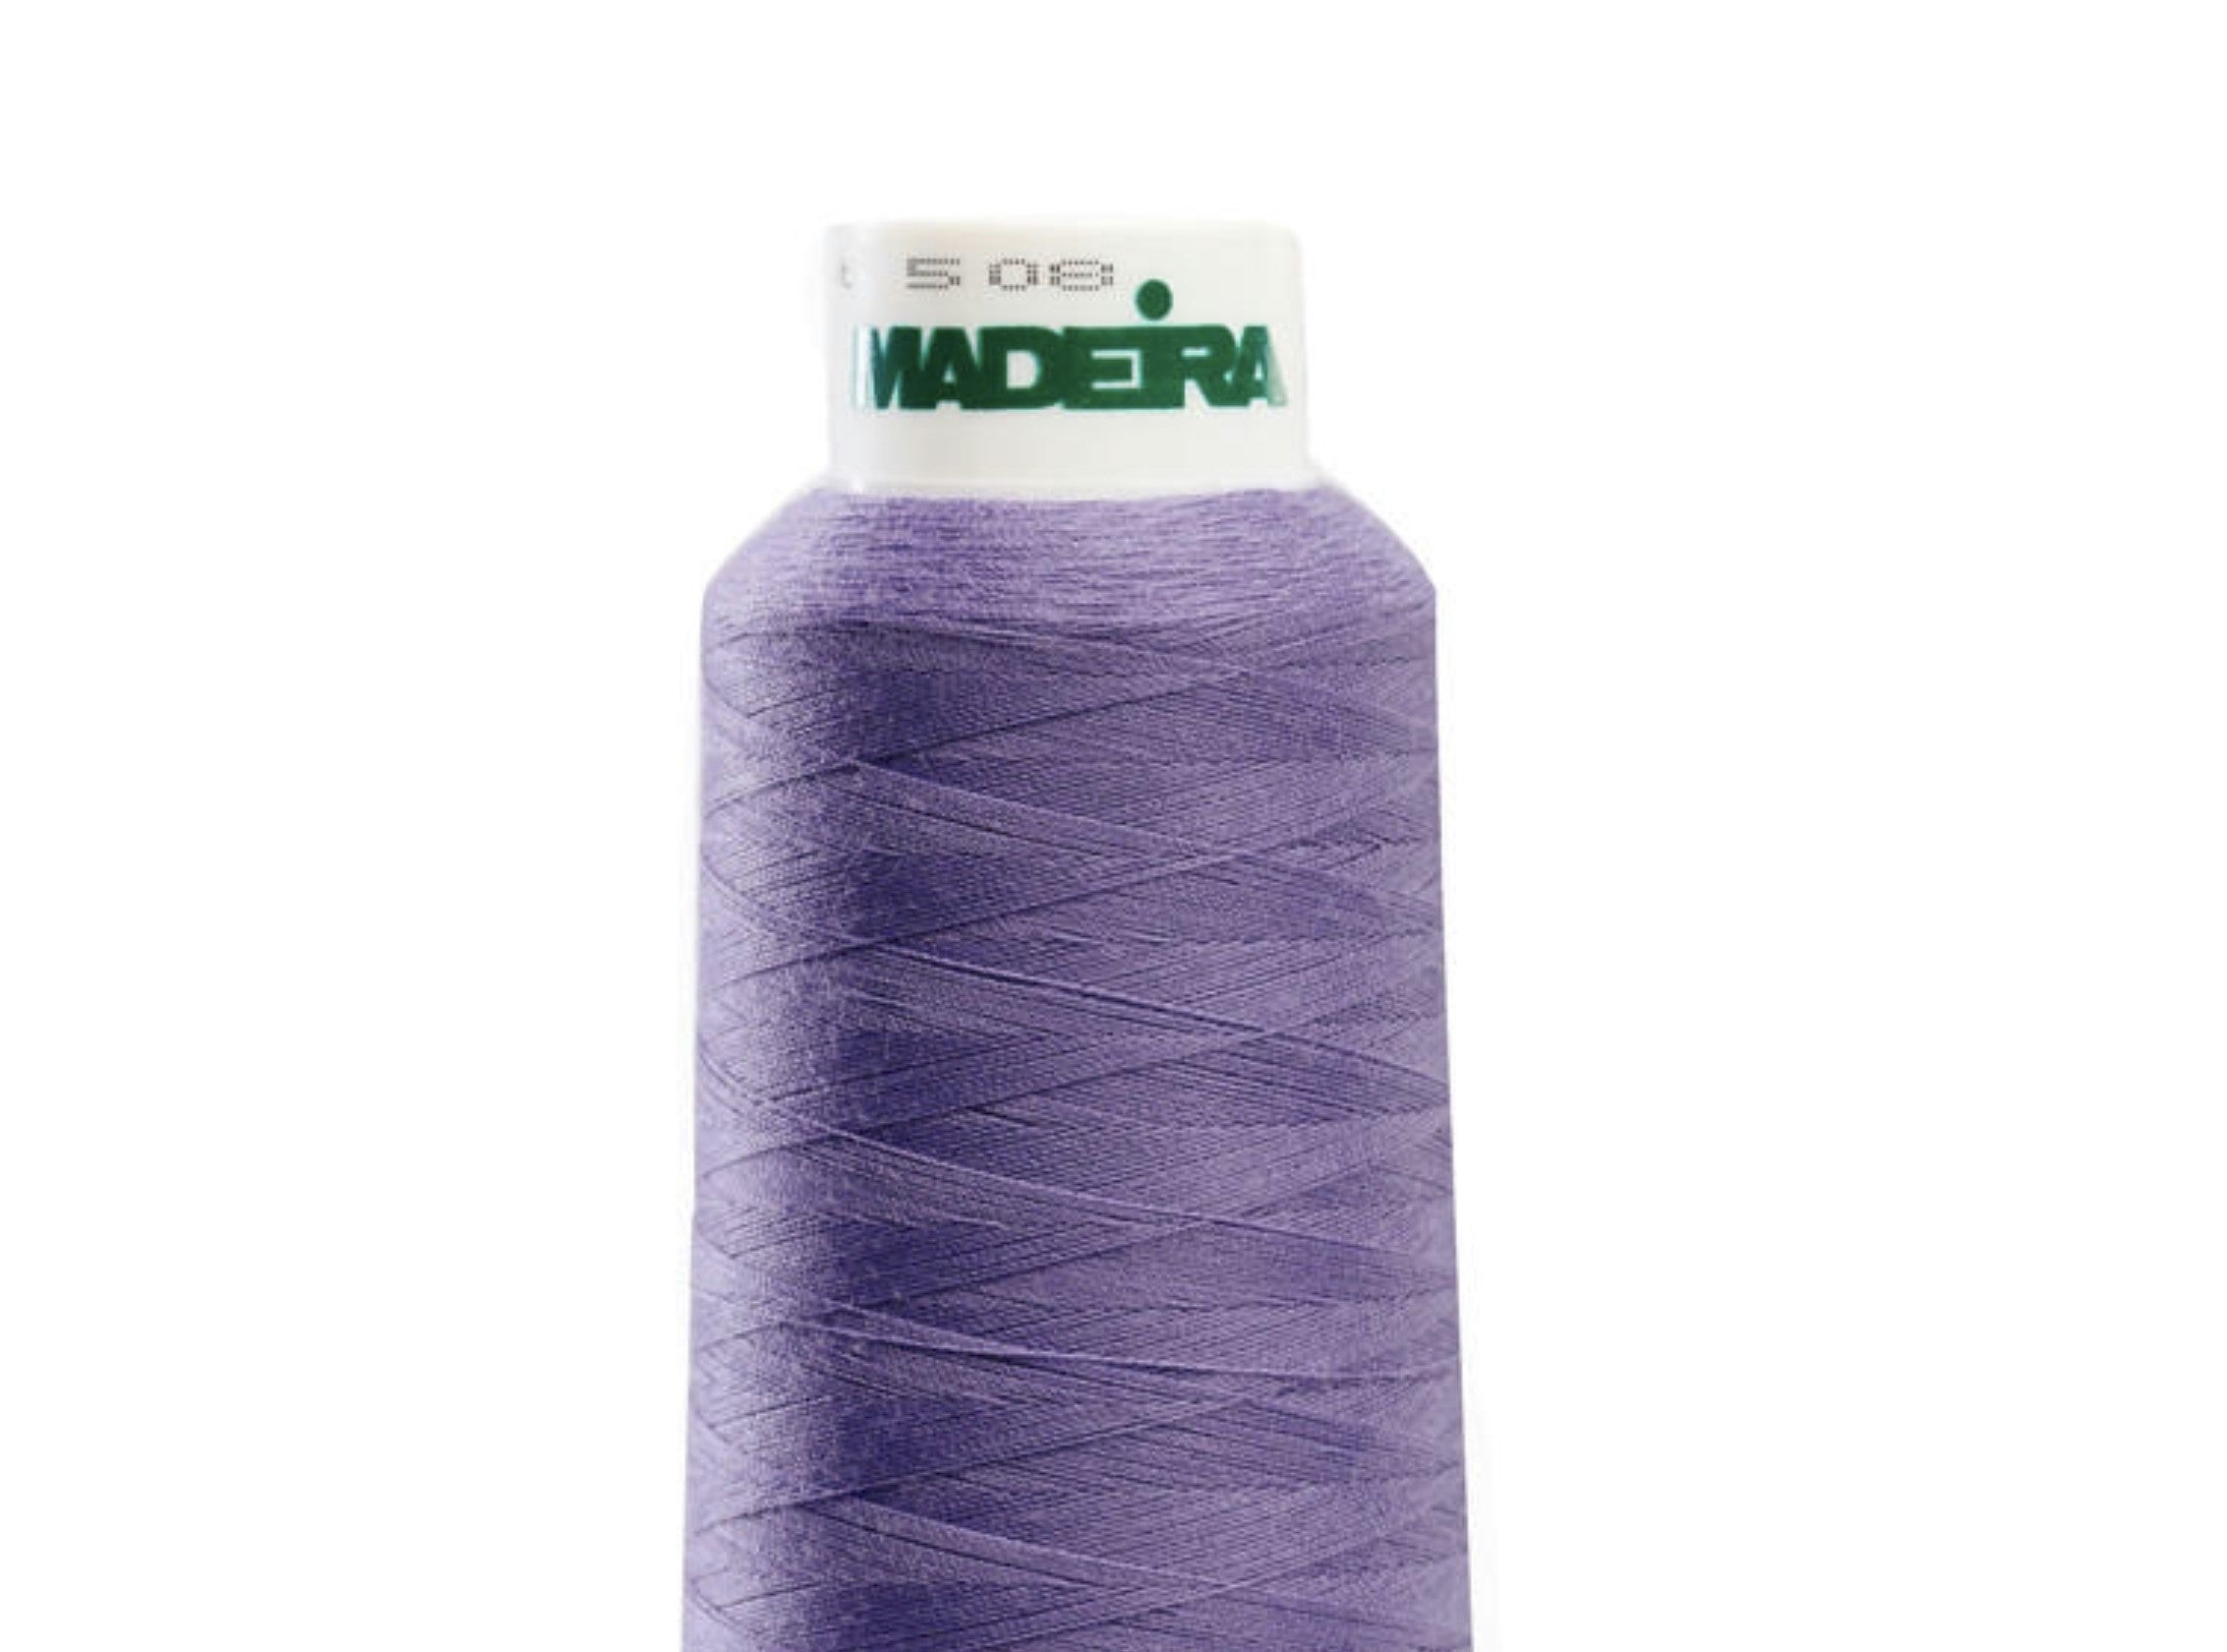 Orchid Color, Aerolock Premium Serger Thread, Ref. 8323 by Madeira®